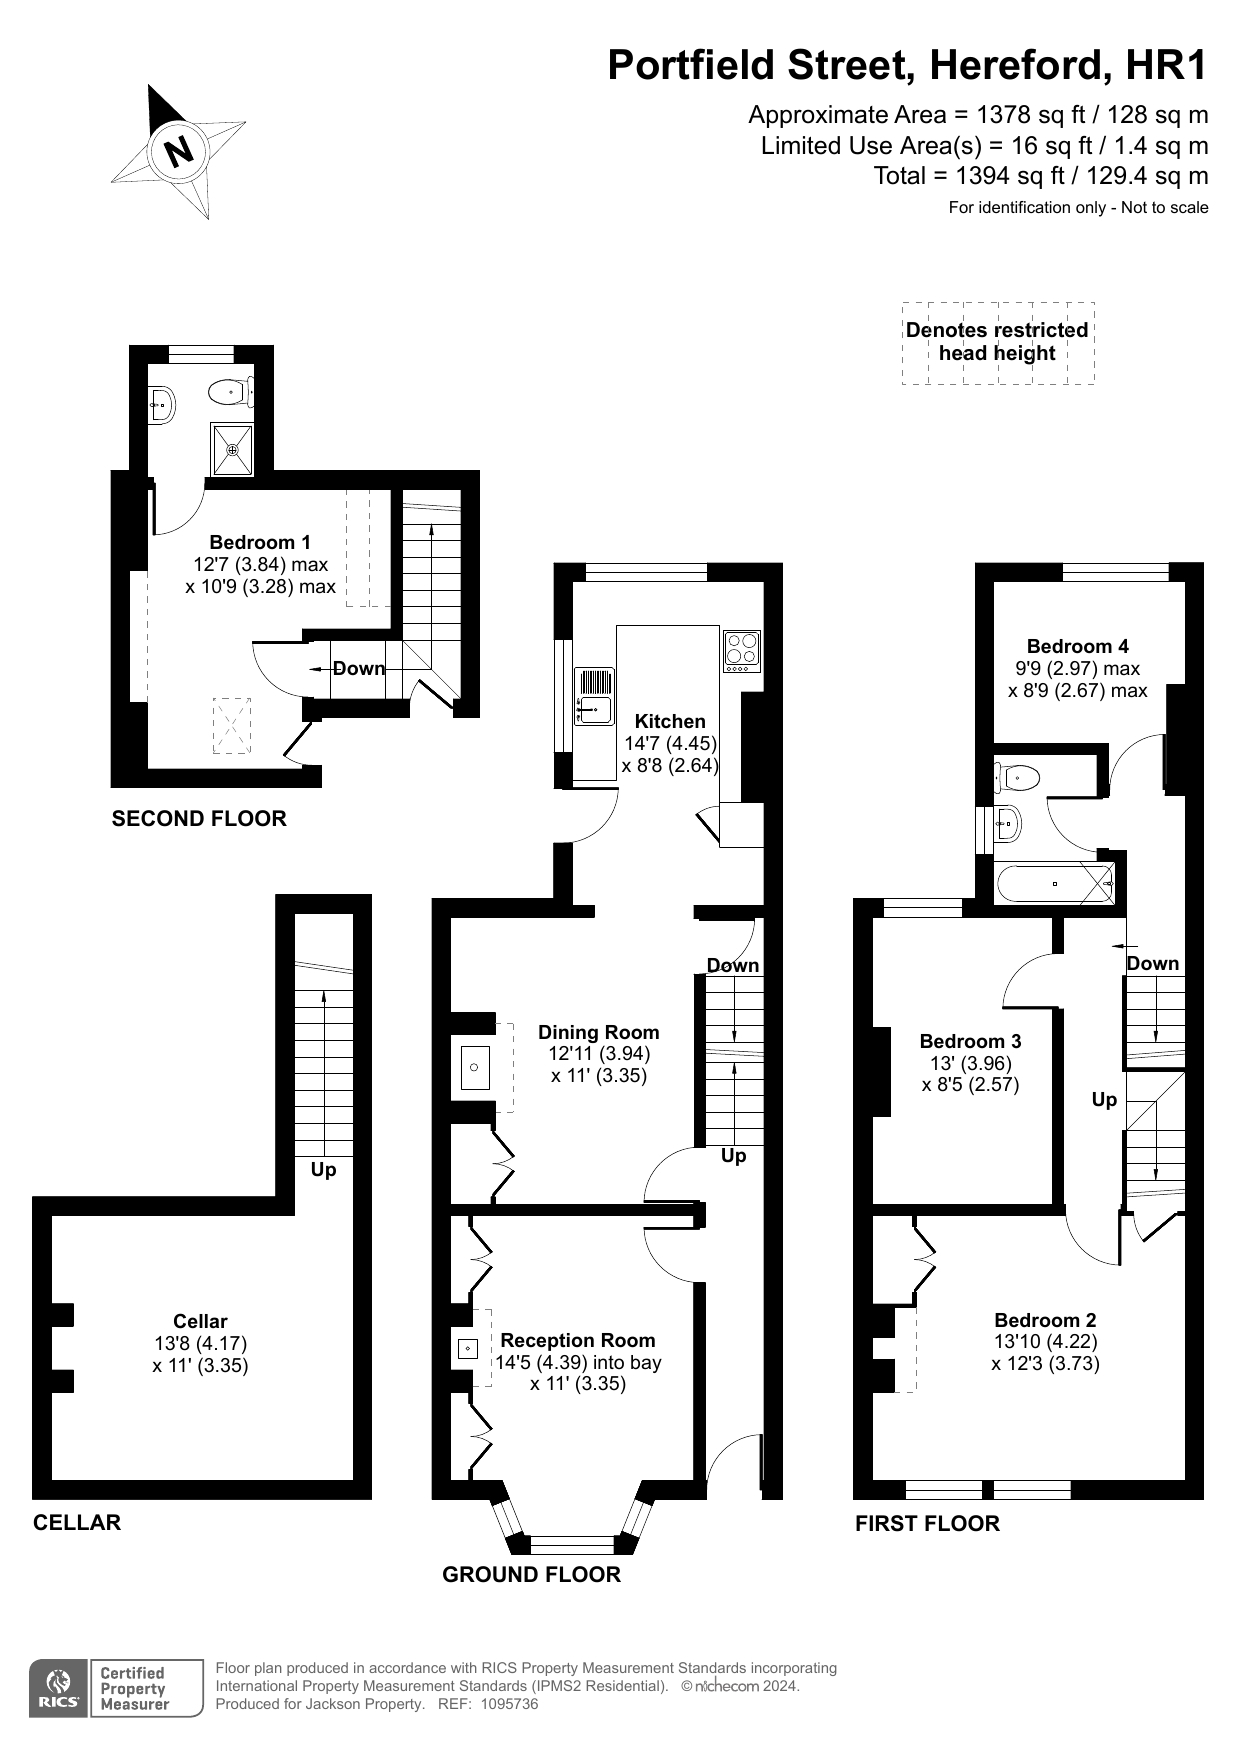 4 bed semi-detached house for sale in Portfield Street, Hereford - Property floorplan